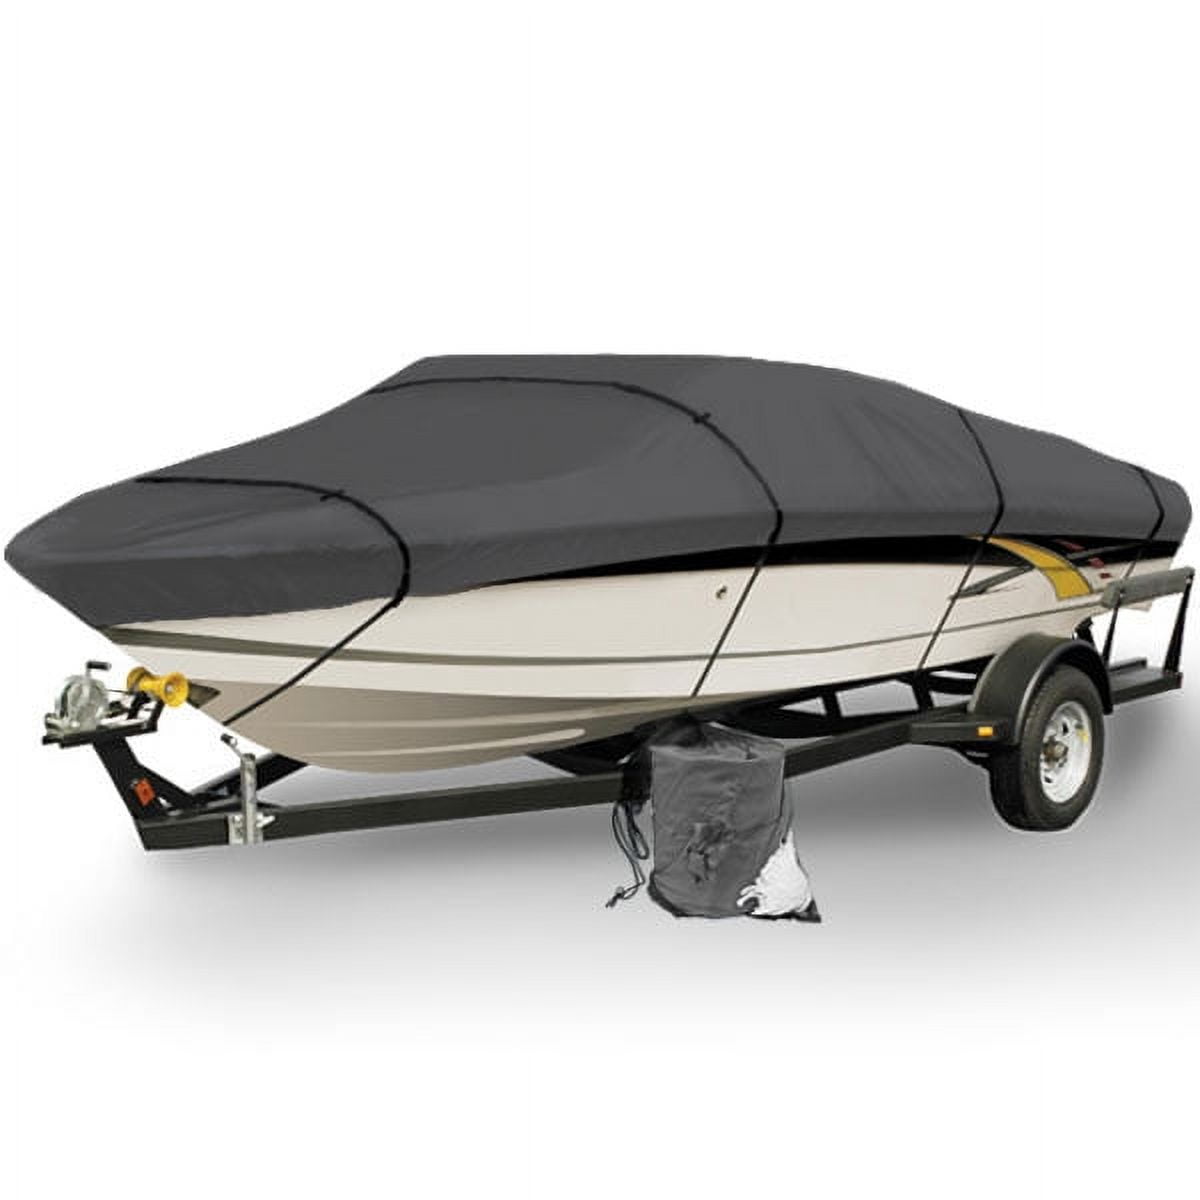 NEH Boat Cover, Thick Heavy Duty Fabric, Fade-Proof, Waterproof